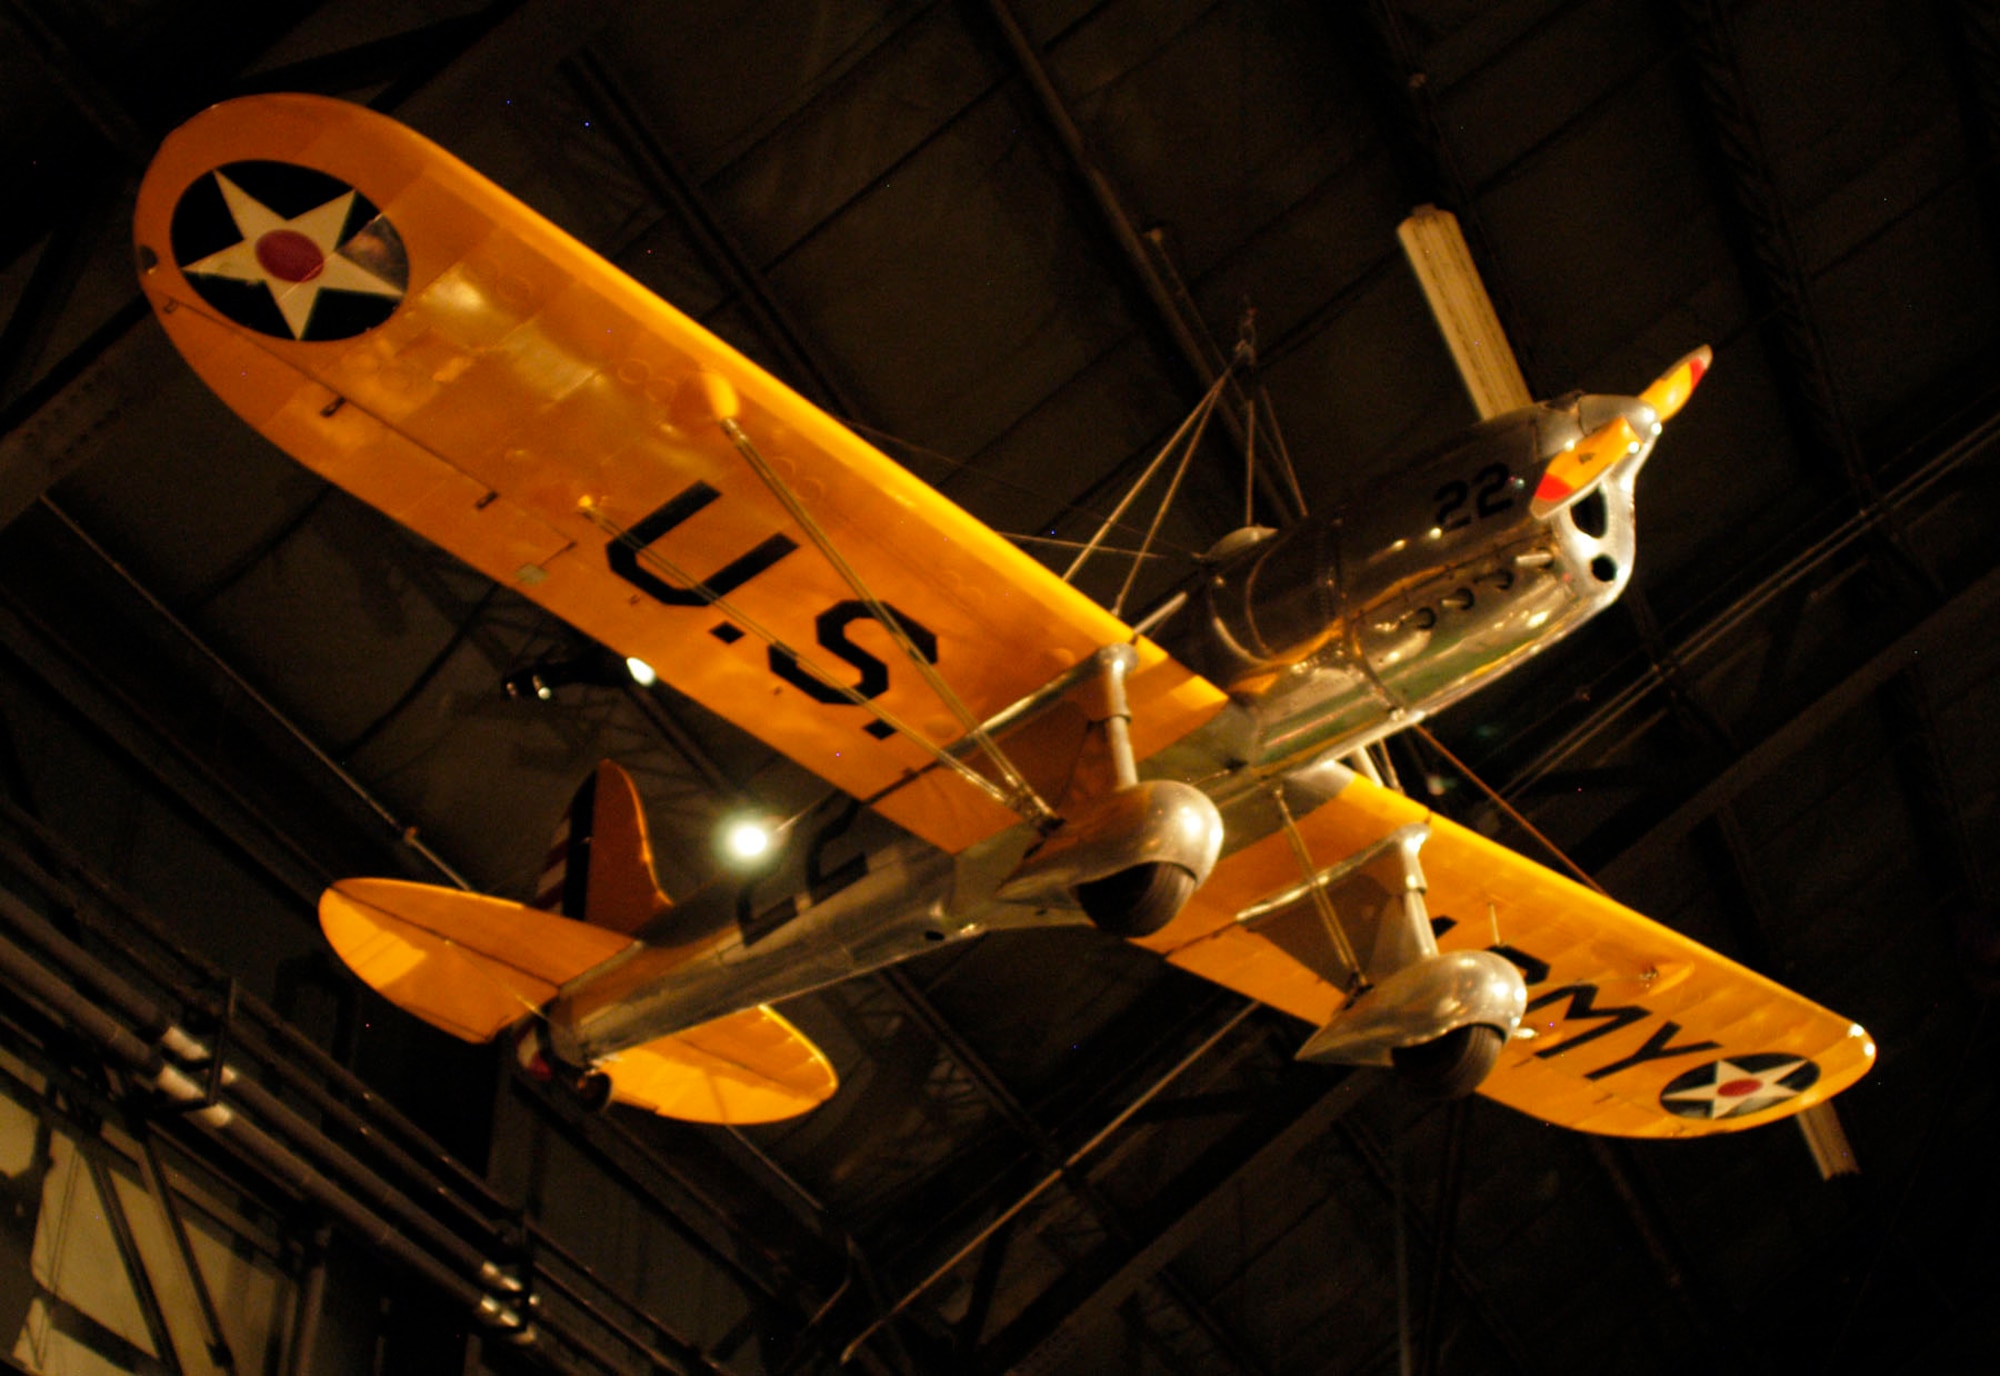 DAYTON, Ohio -- Ryan YPT-16 in the Early Years Gallery at the National Museum of the United States Air Force. (U.S. Air Force photo)